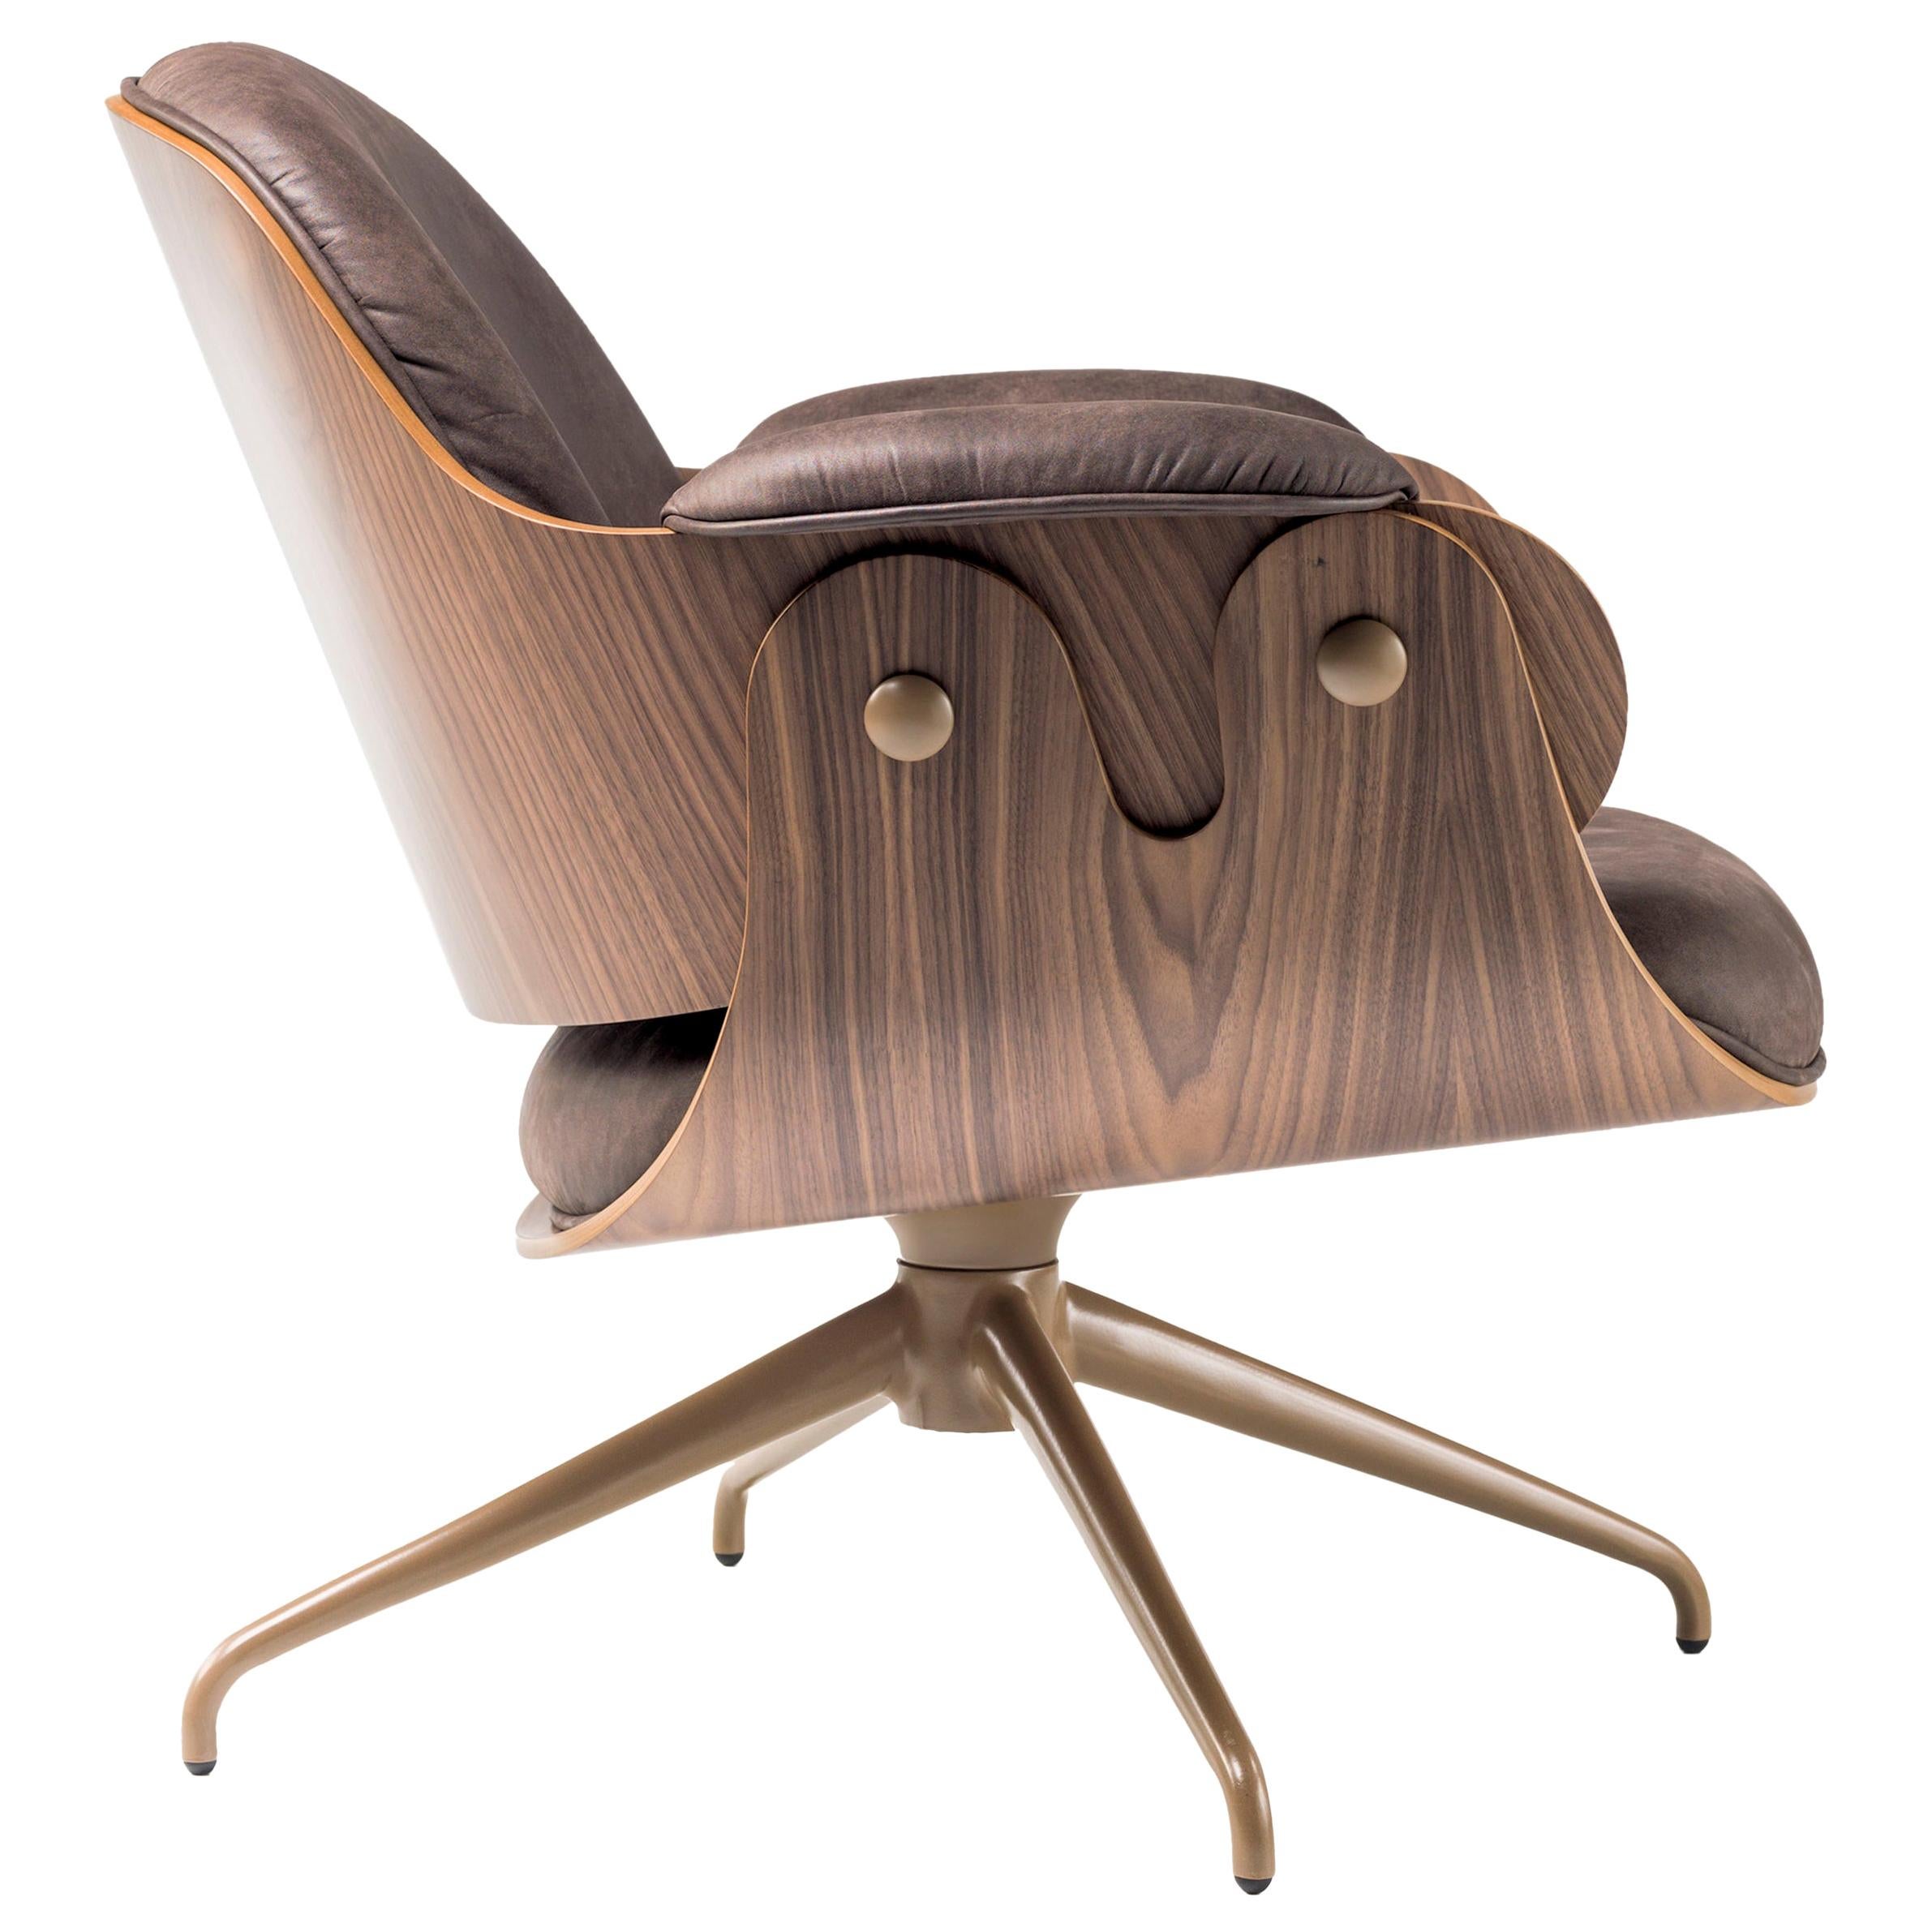 Jaime Hayon, Contemporary, Plywood Walnut Leather Low Lounger Armchair